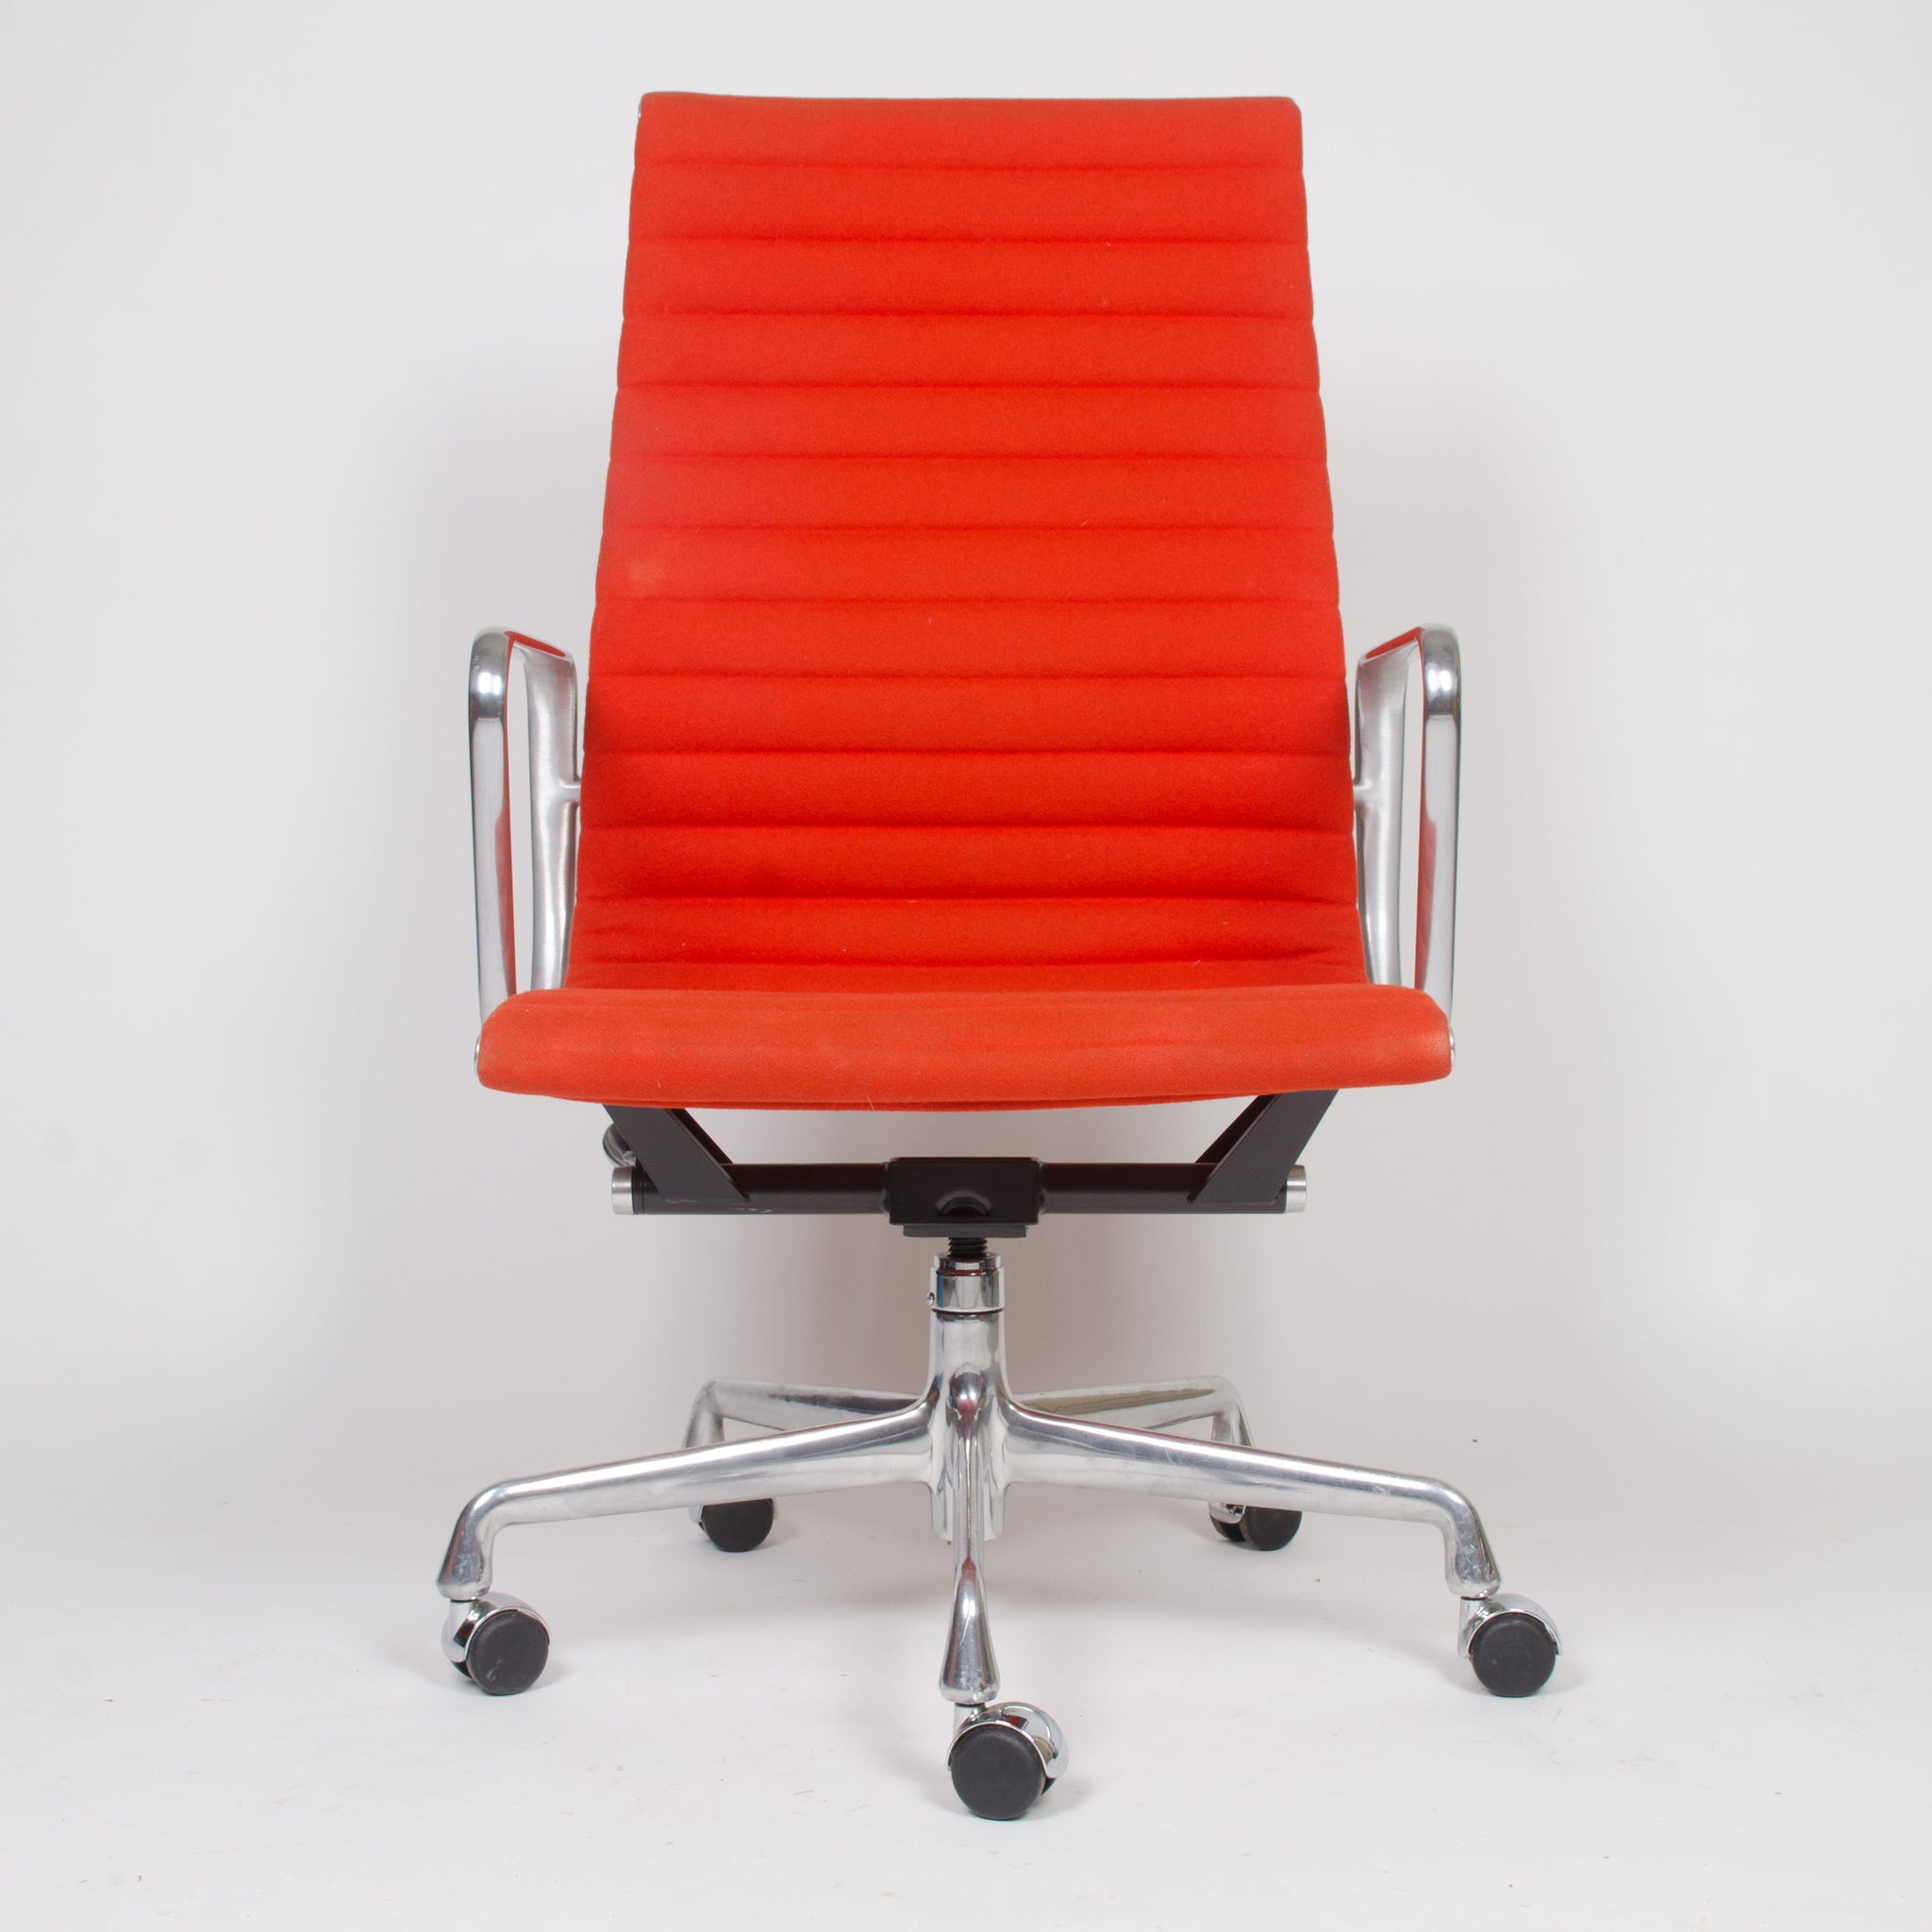 SOLD Eames Herman Miller Fabric High Executive Aluminum Group Desk Chairs (4x)